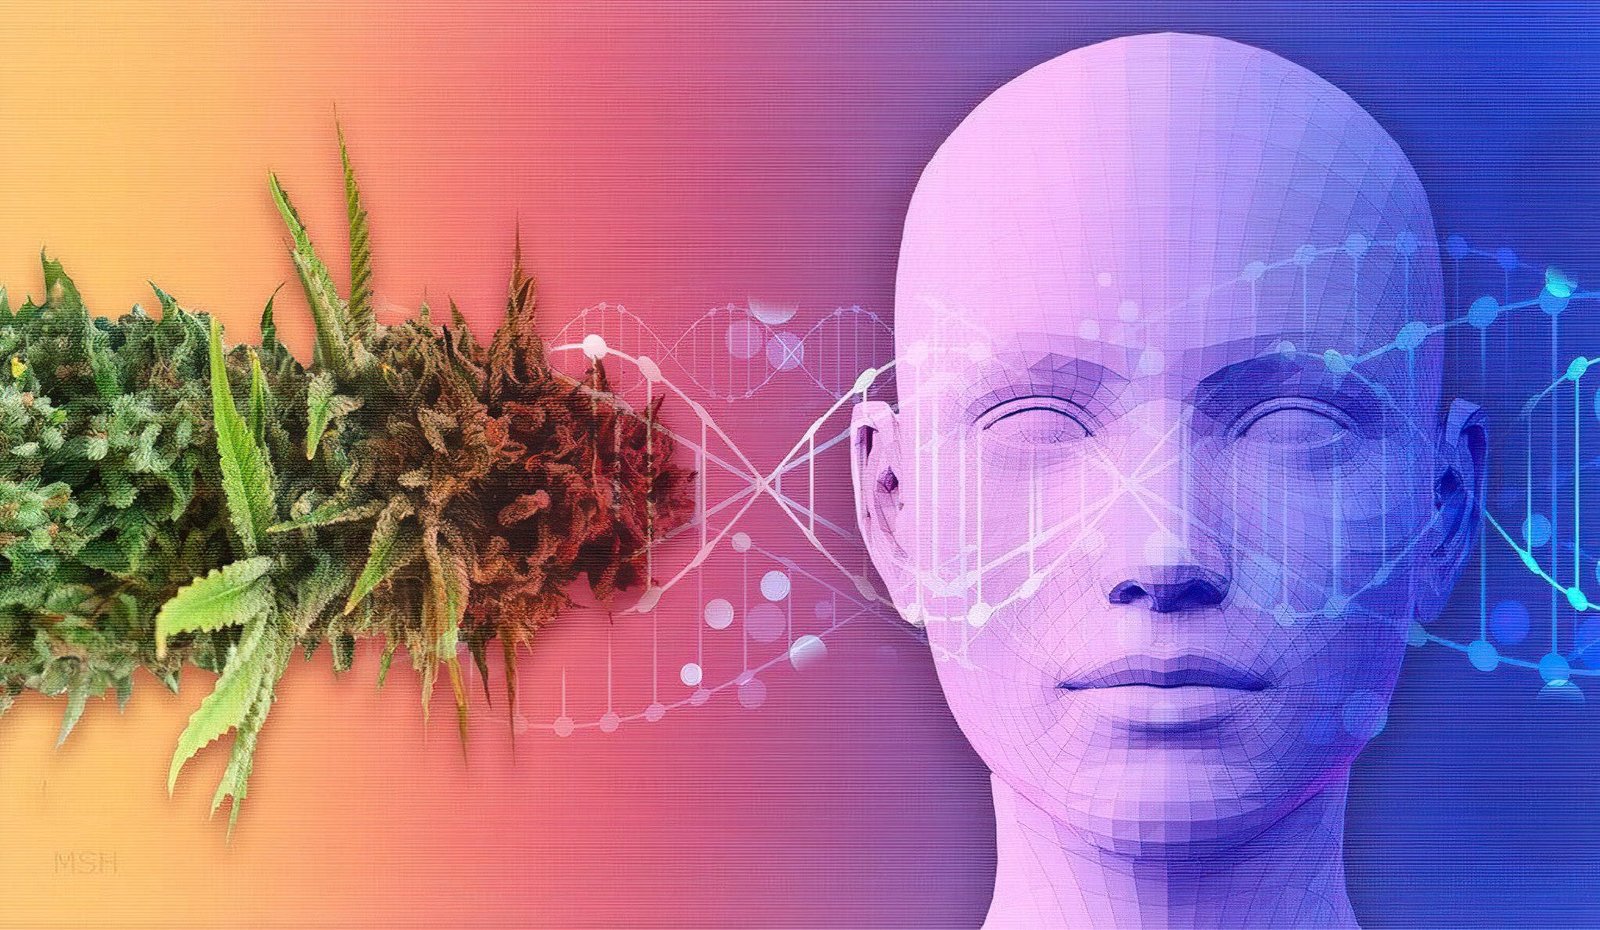 New Study Links Excess Cannabis Use to Numerous Health Problems